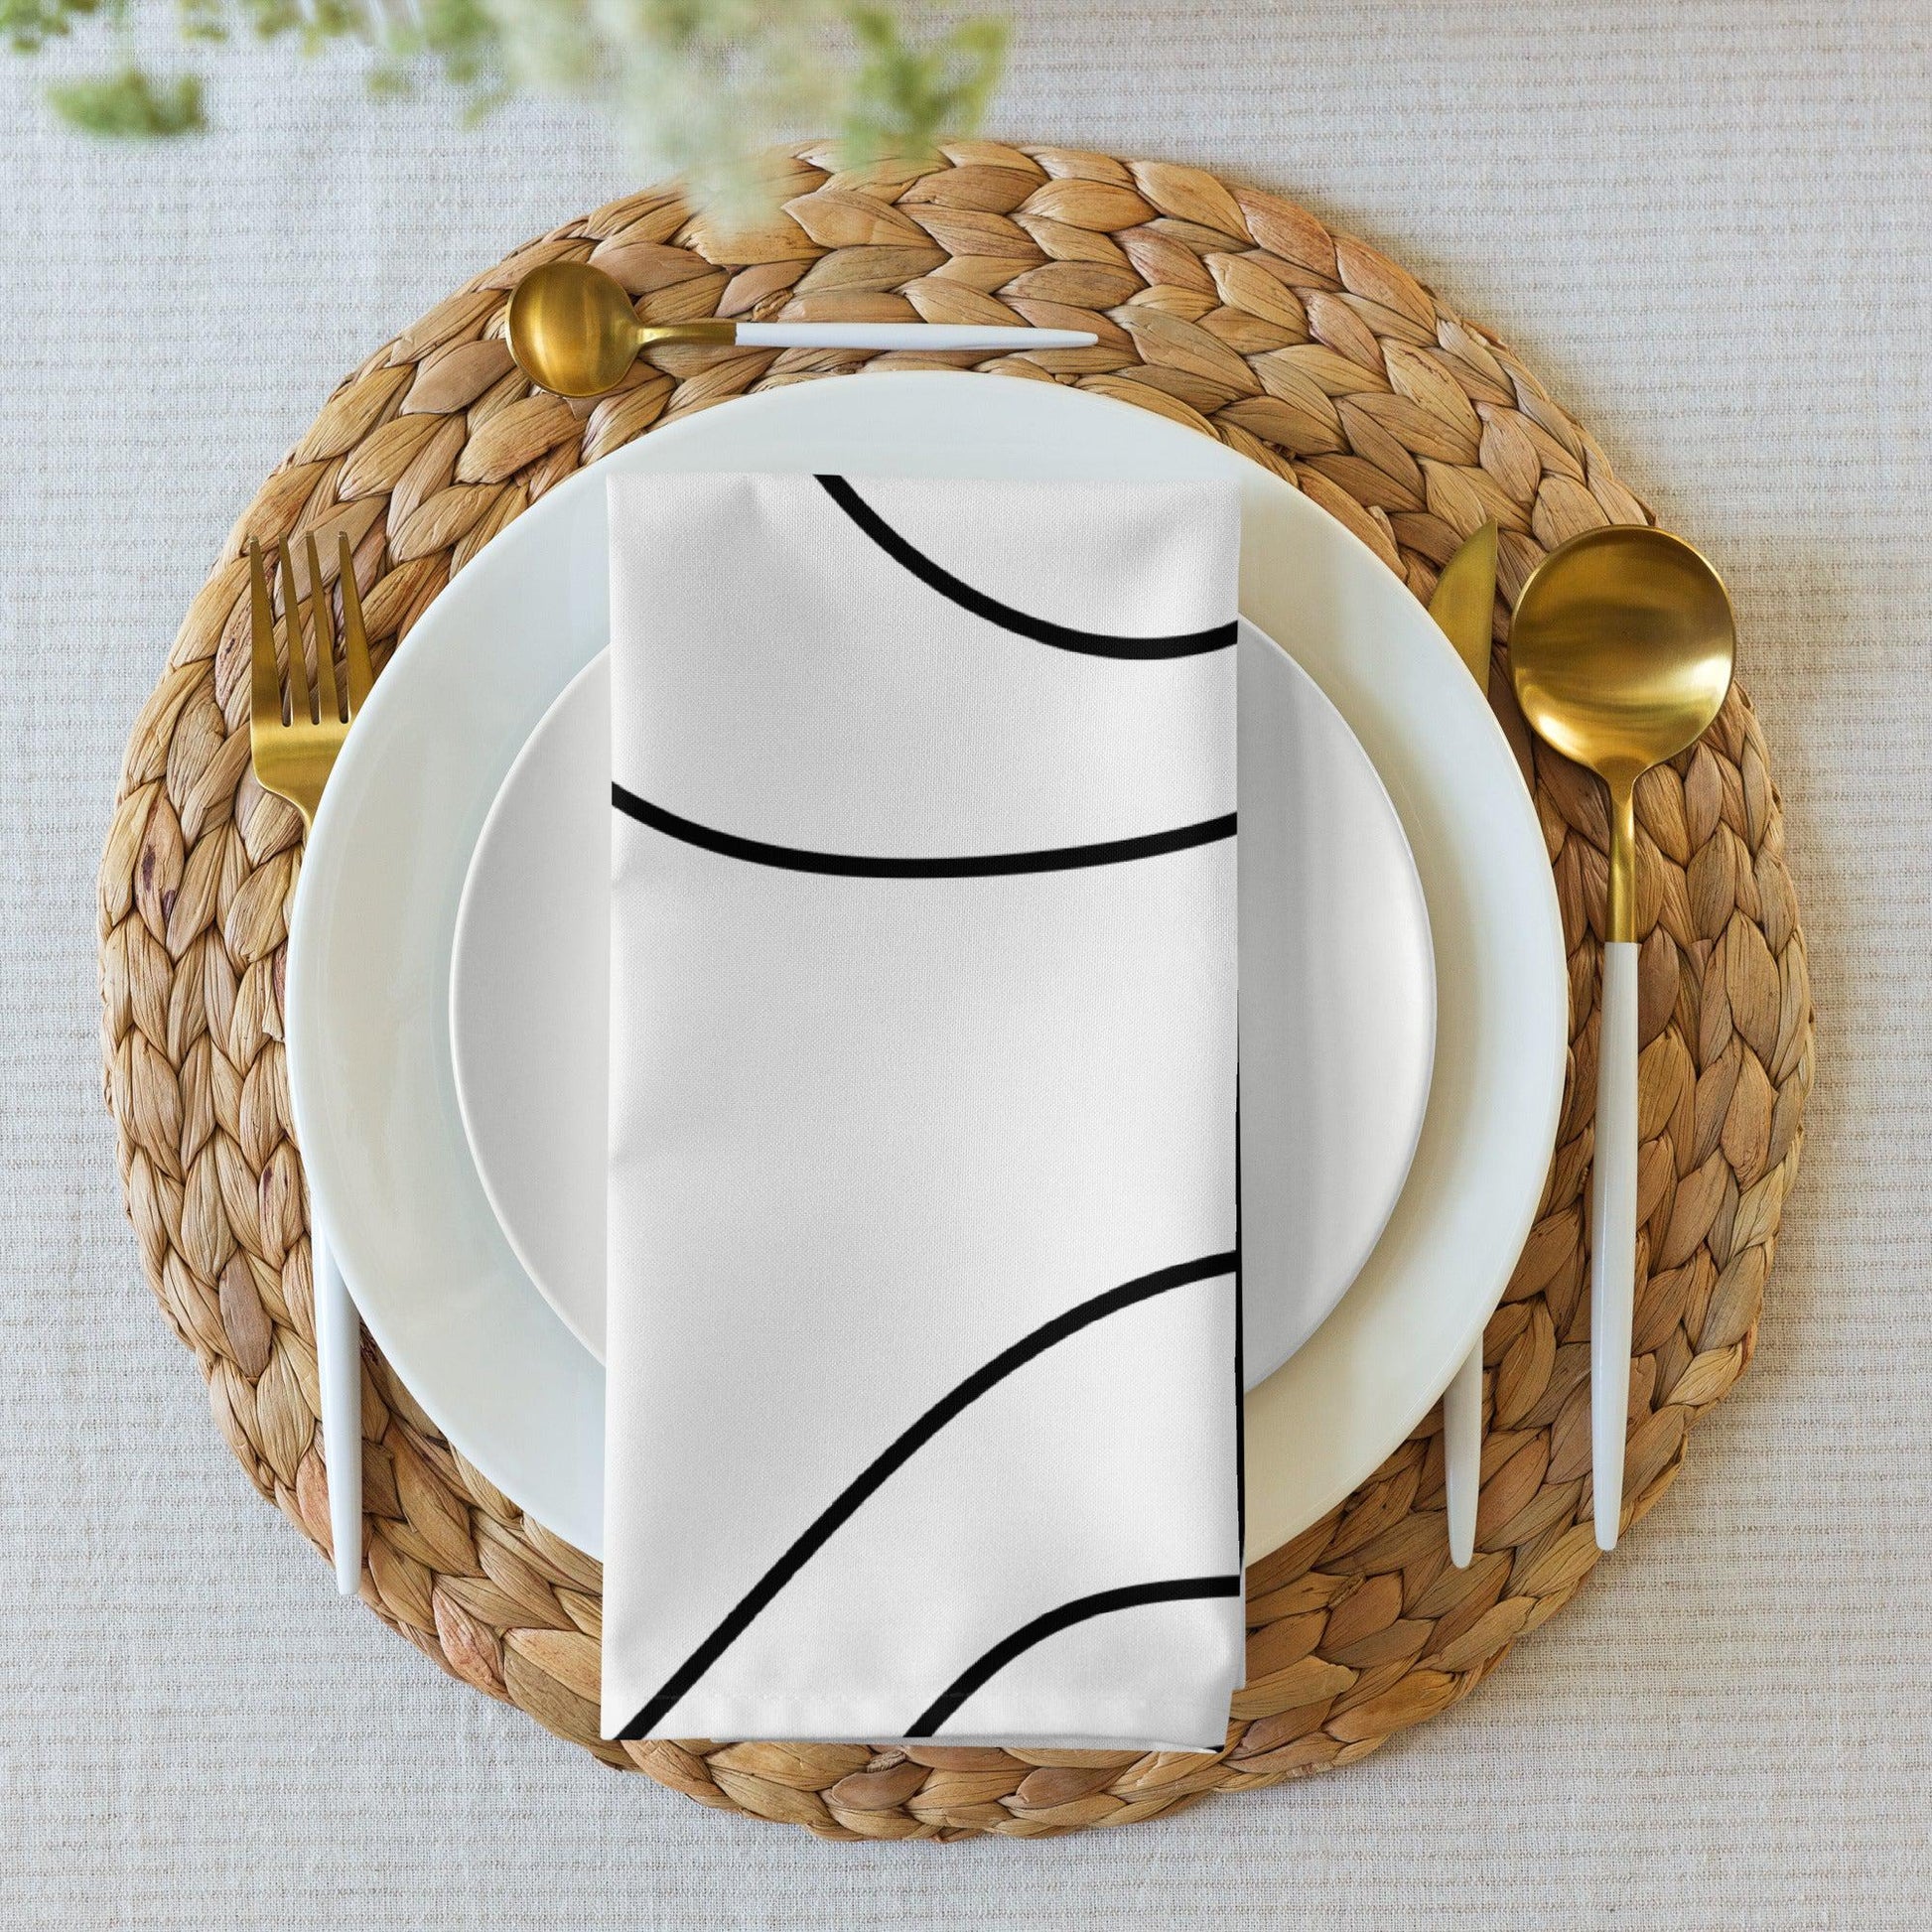 Monochrome Chic: White and Black Designed Cloth Napkin Set – A Timeless Addition to Your Dining Decor